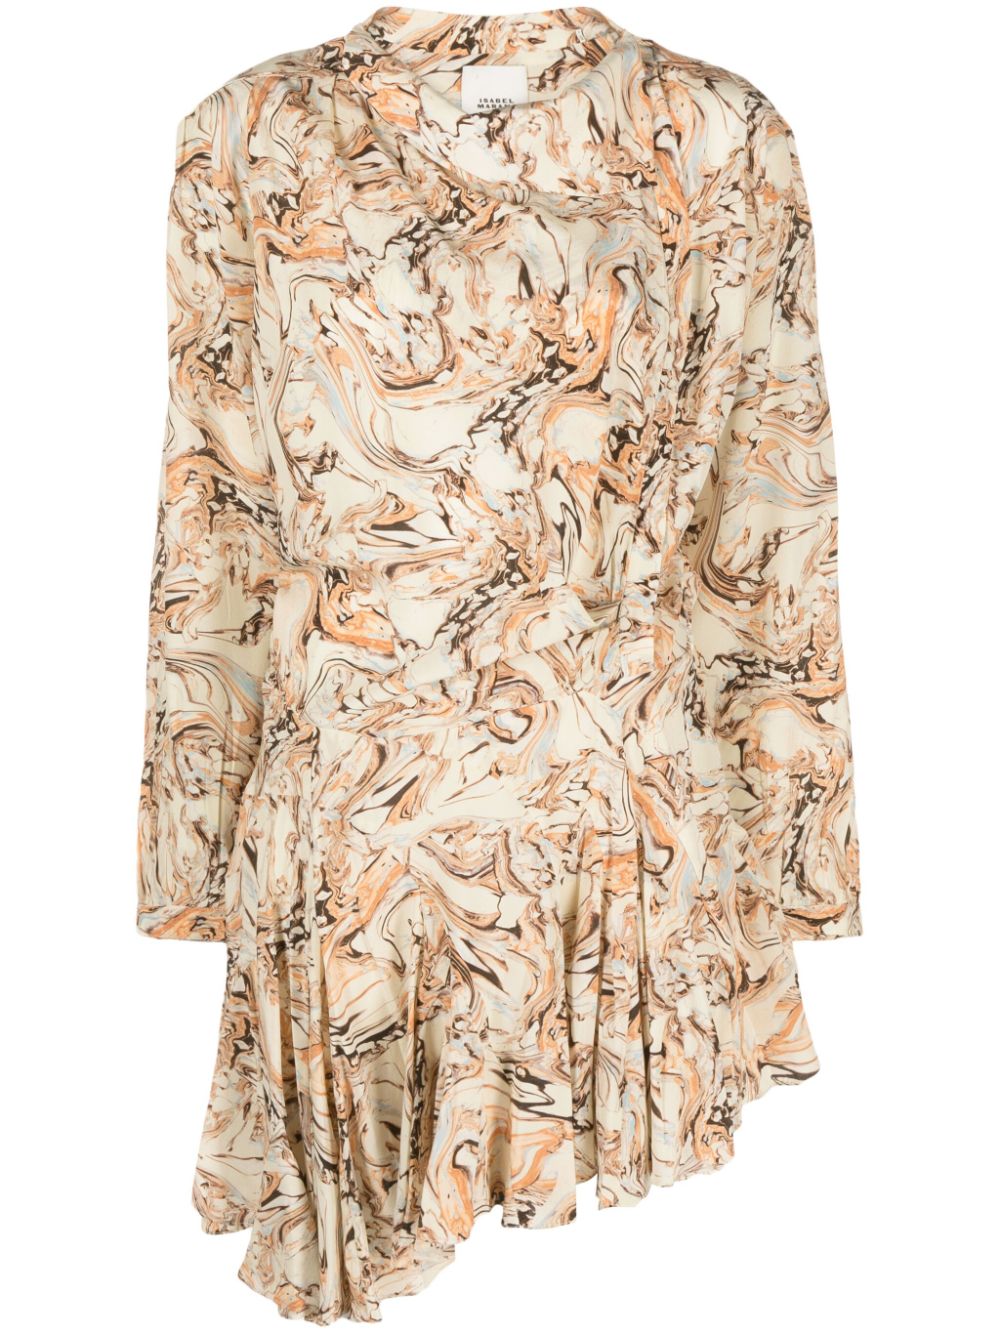 ISABEL MARANT Abstract-Print Silk Minidress for Women in Tan - FW23 Collection